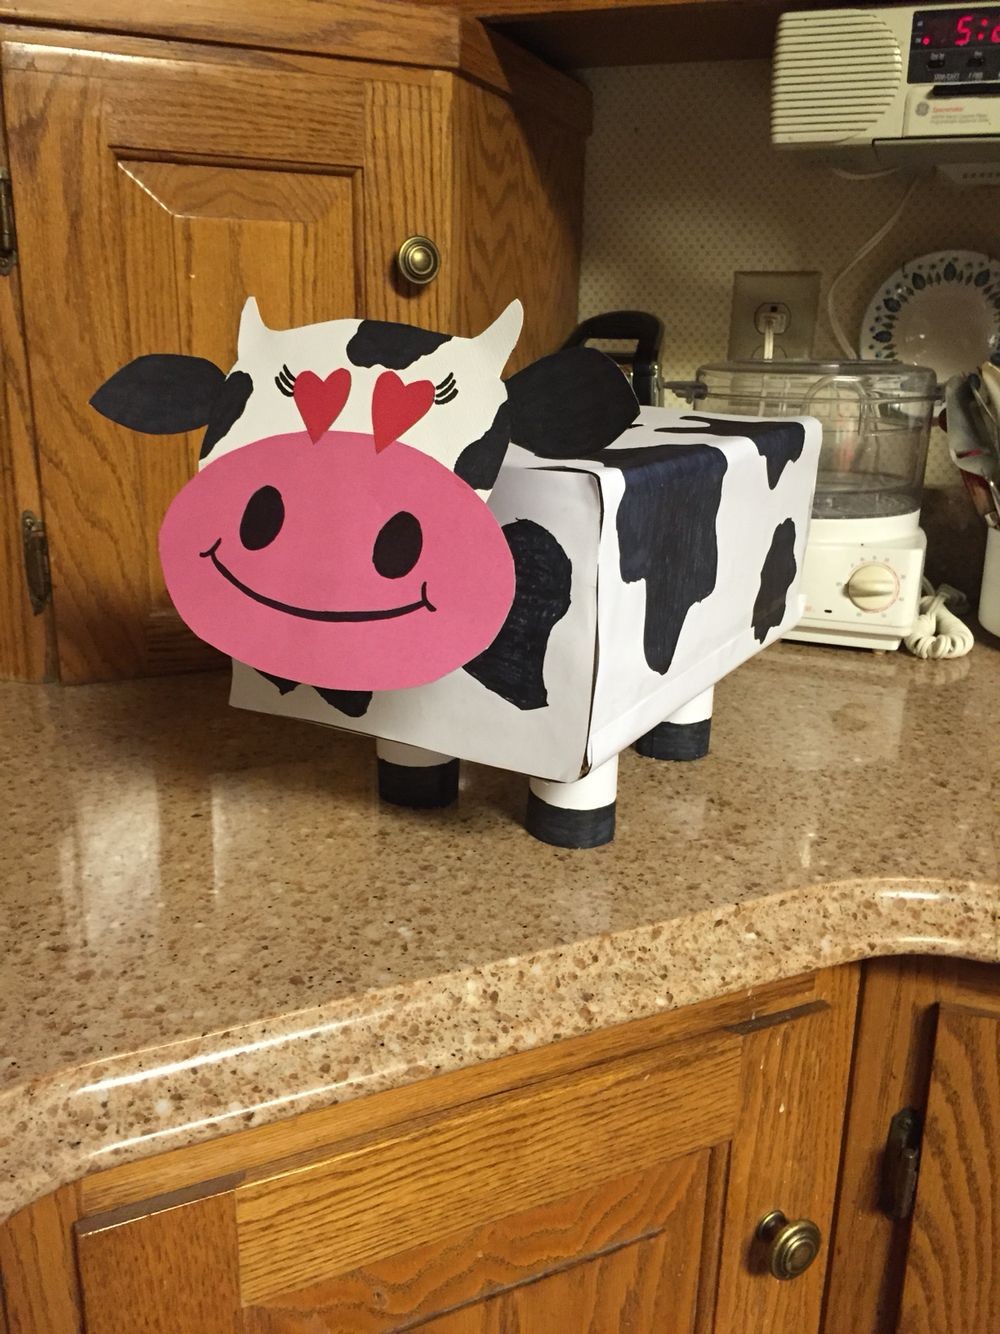 Cow Papercraft Cow Valentine S Day Box for Kids toilet Paper Rolls as Legs and